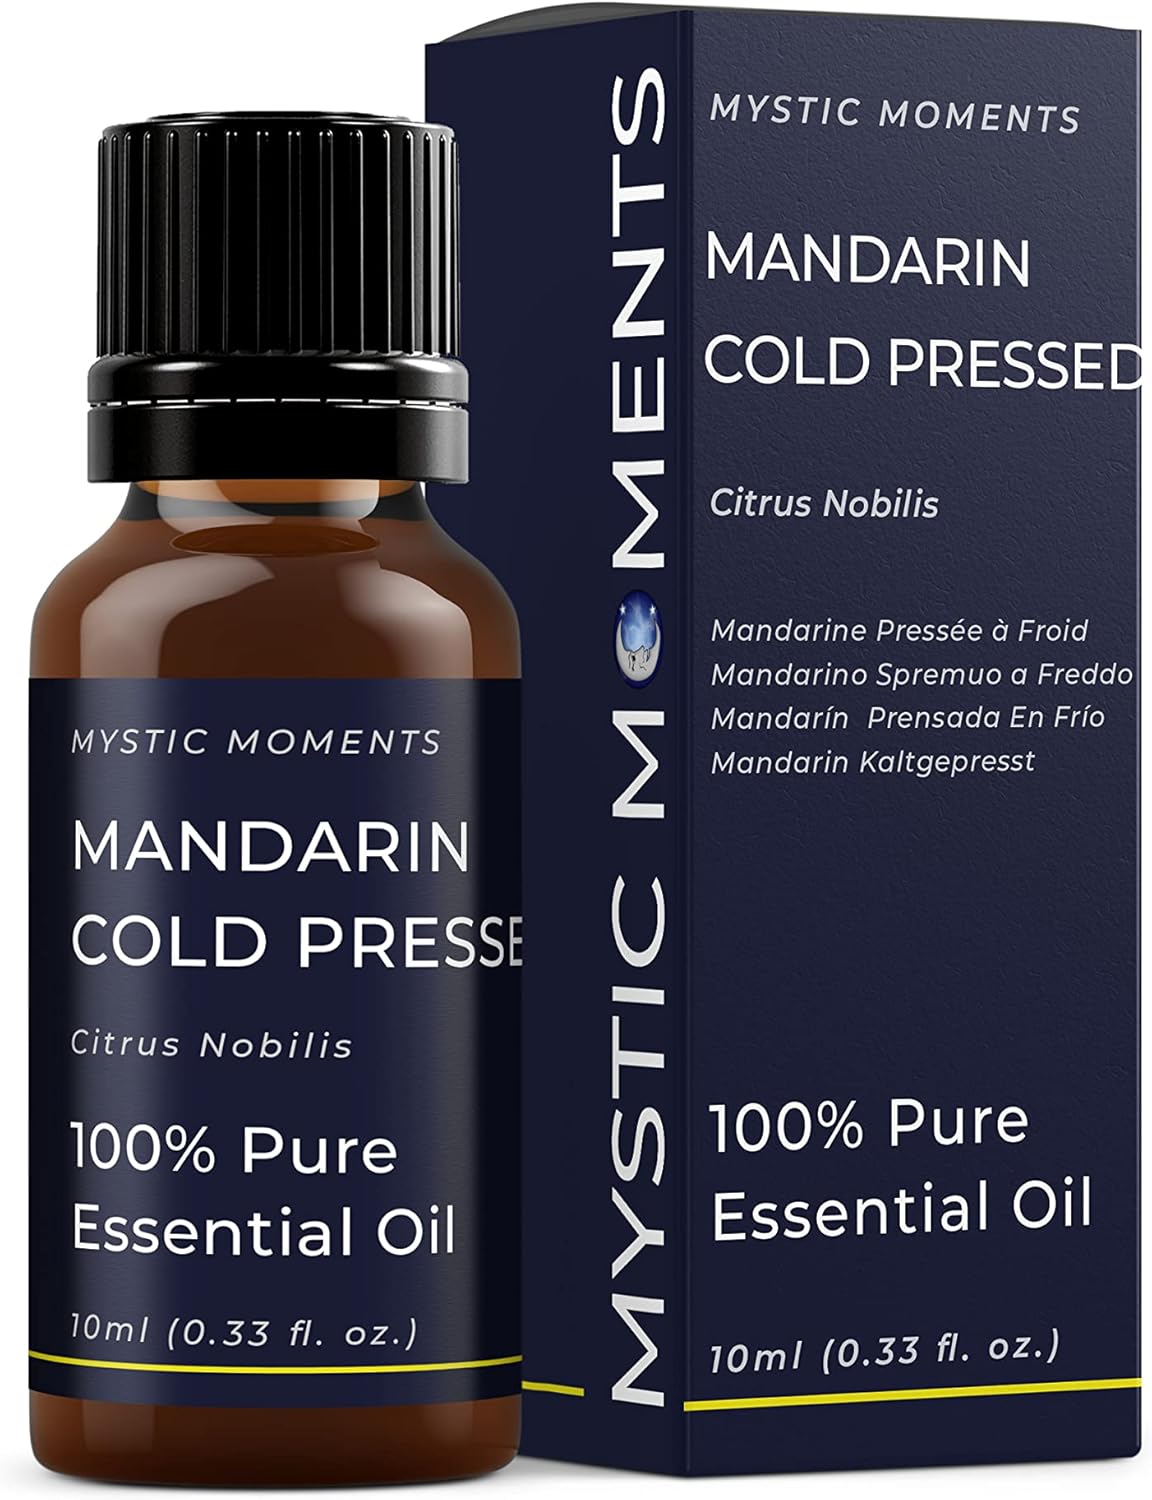 Mystic Moments | Mandarin Cold Pressed Essential Oil 10ml - Pure & Natural oil for Diffusers, Aromatherapy & Massage Blends Vegan GMO Free